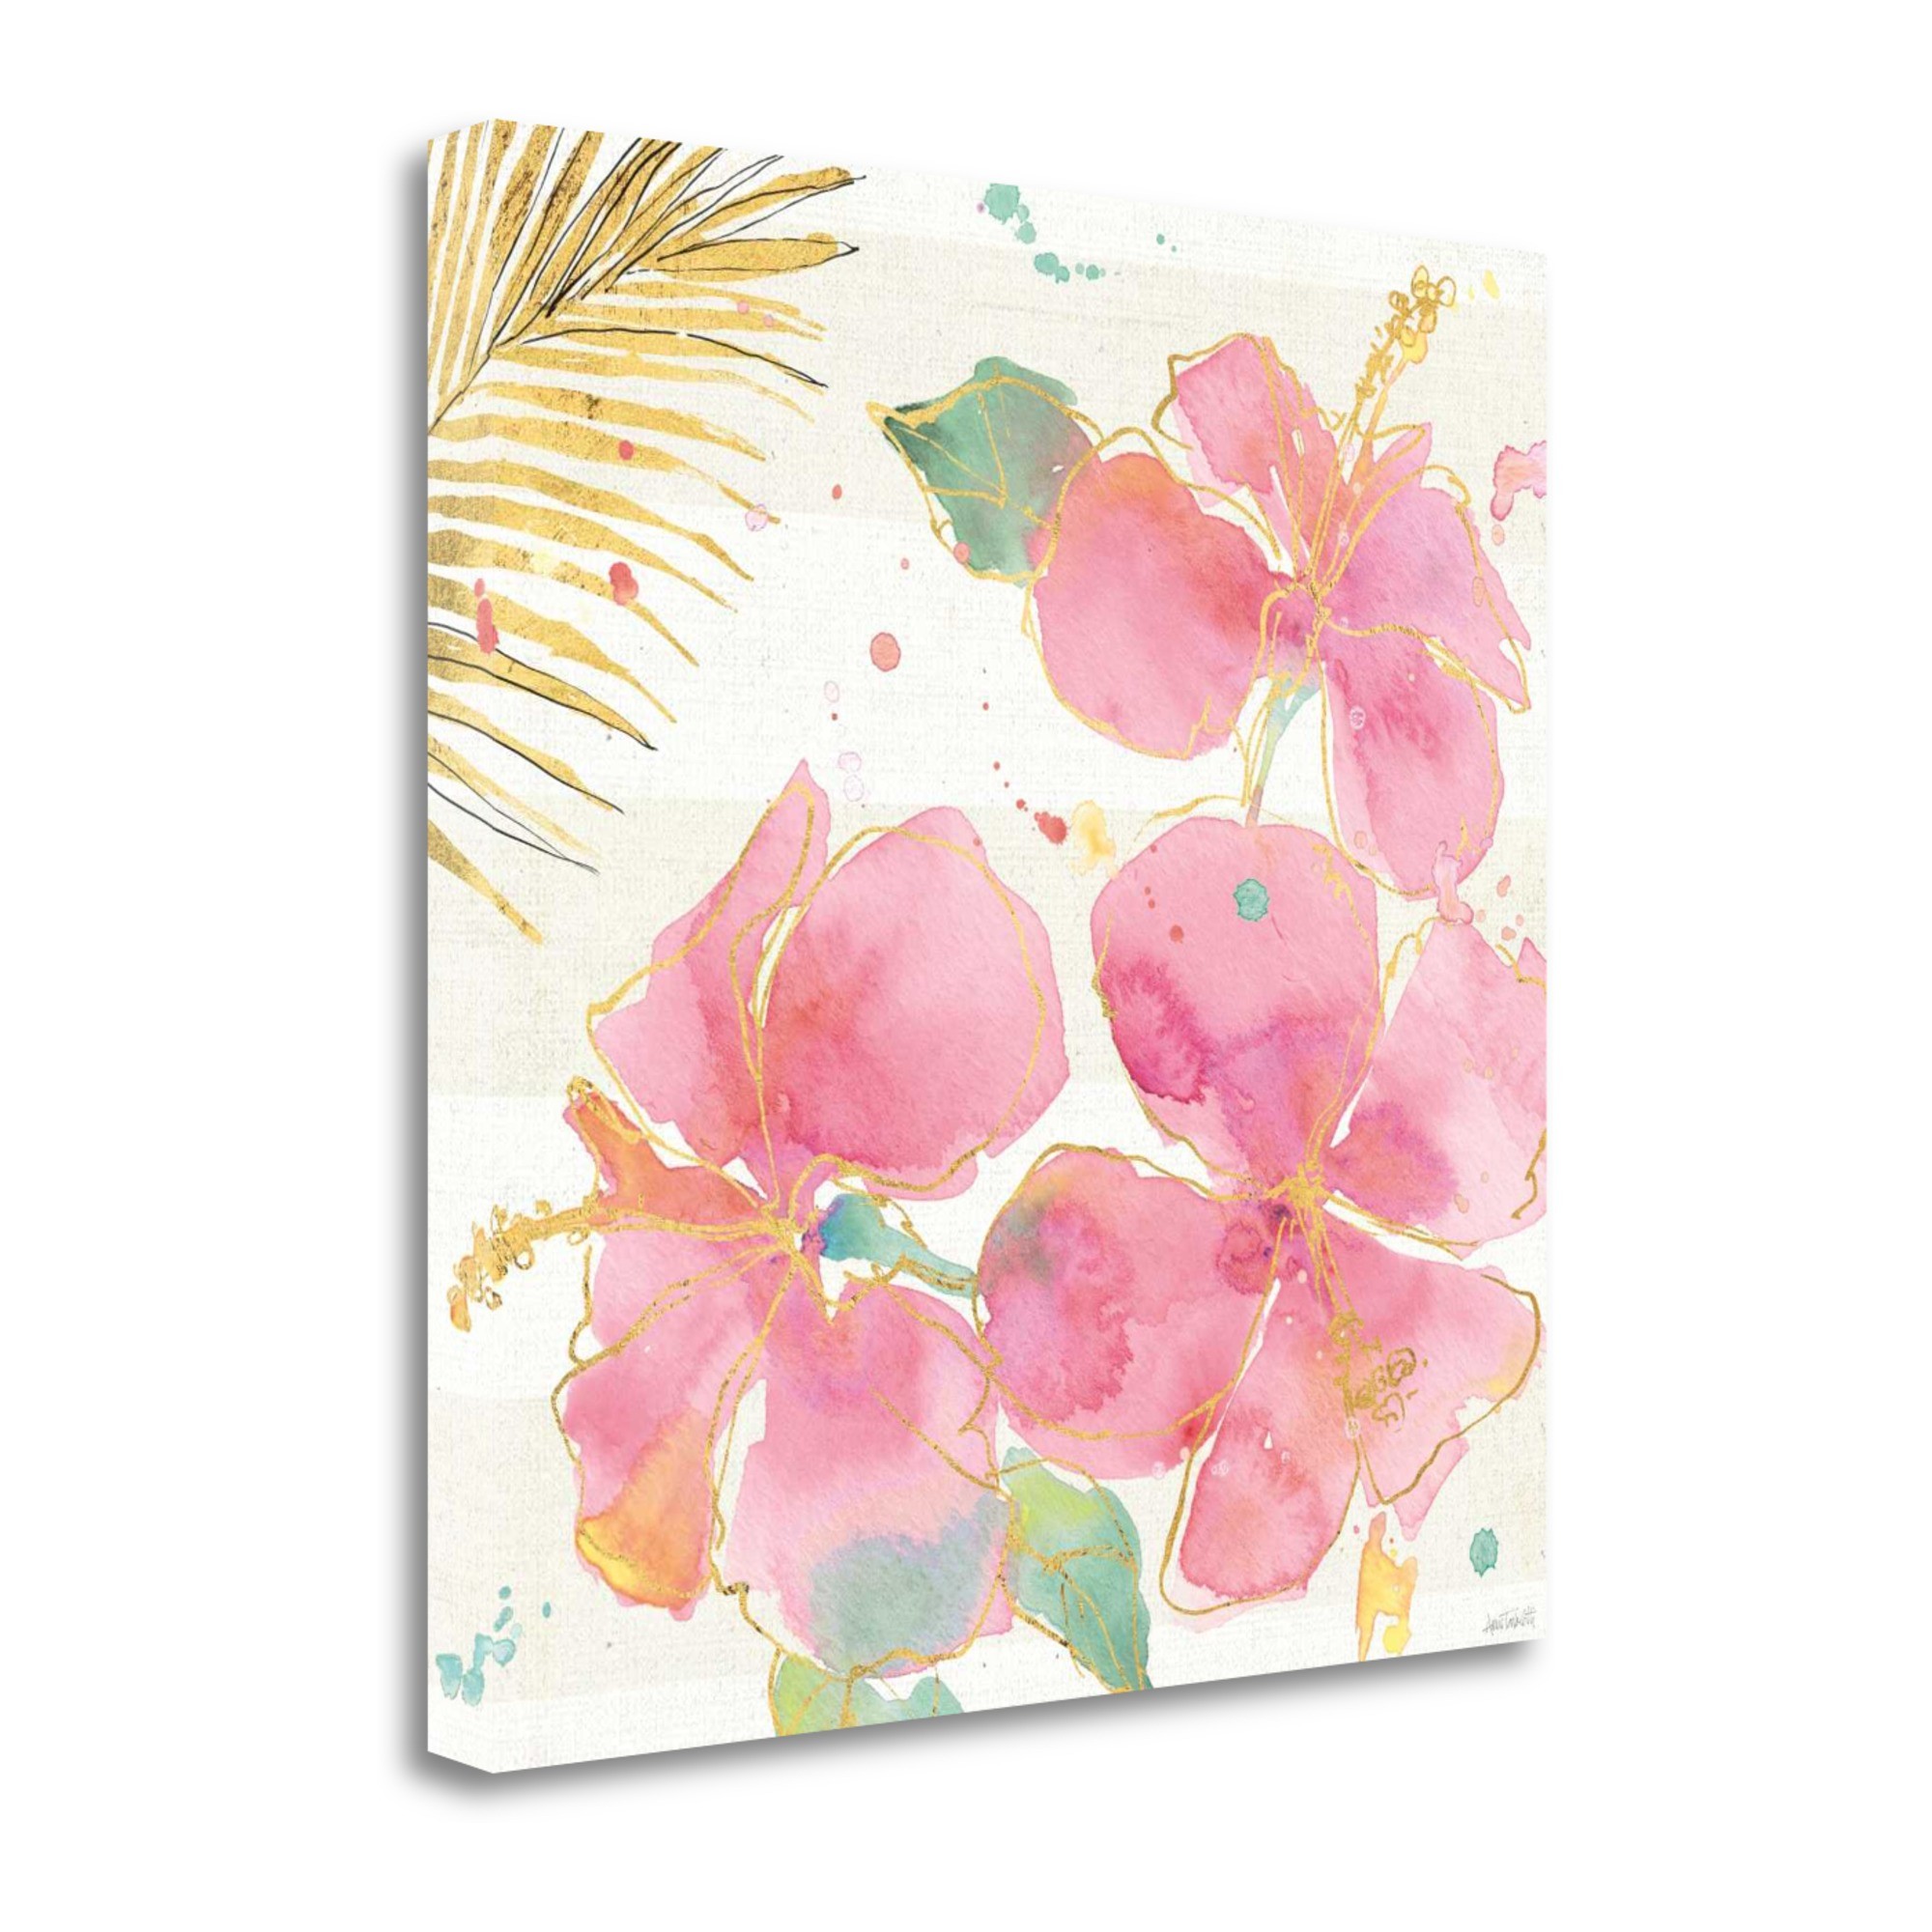 Watercolor Hibiscus Flowers 5 Giclee Wrap Canvas Wall Art